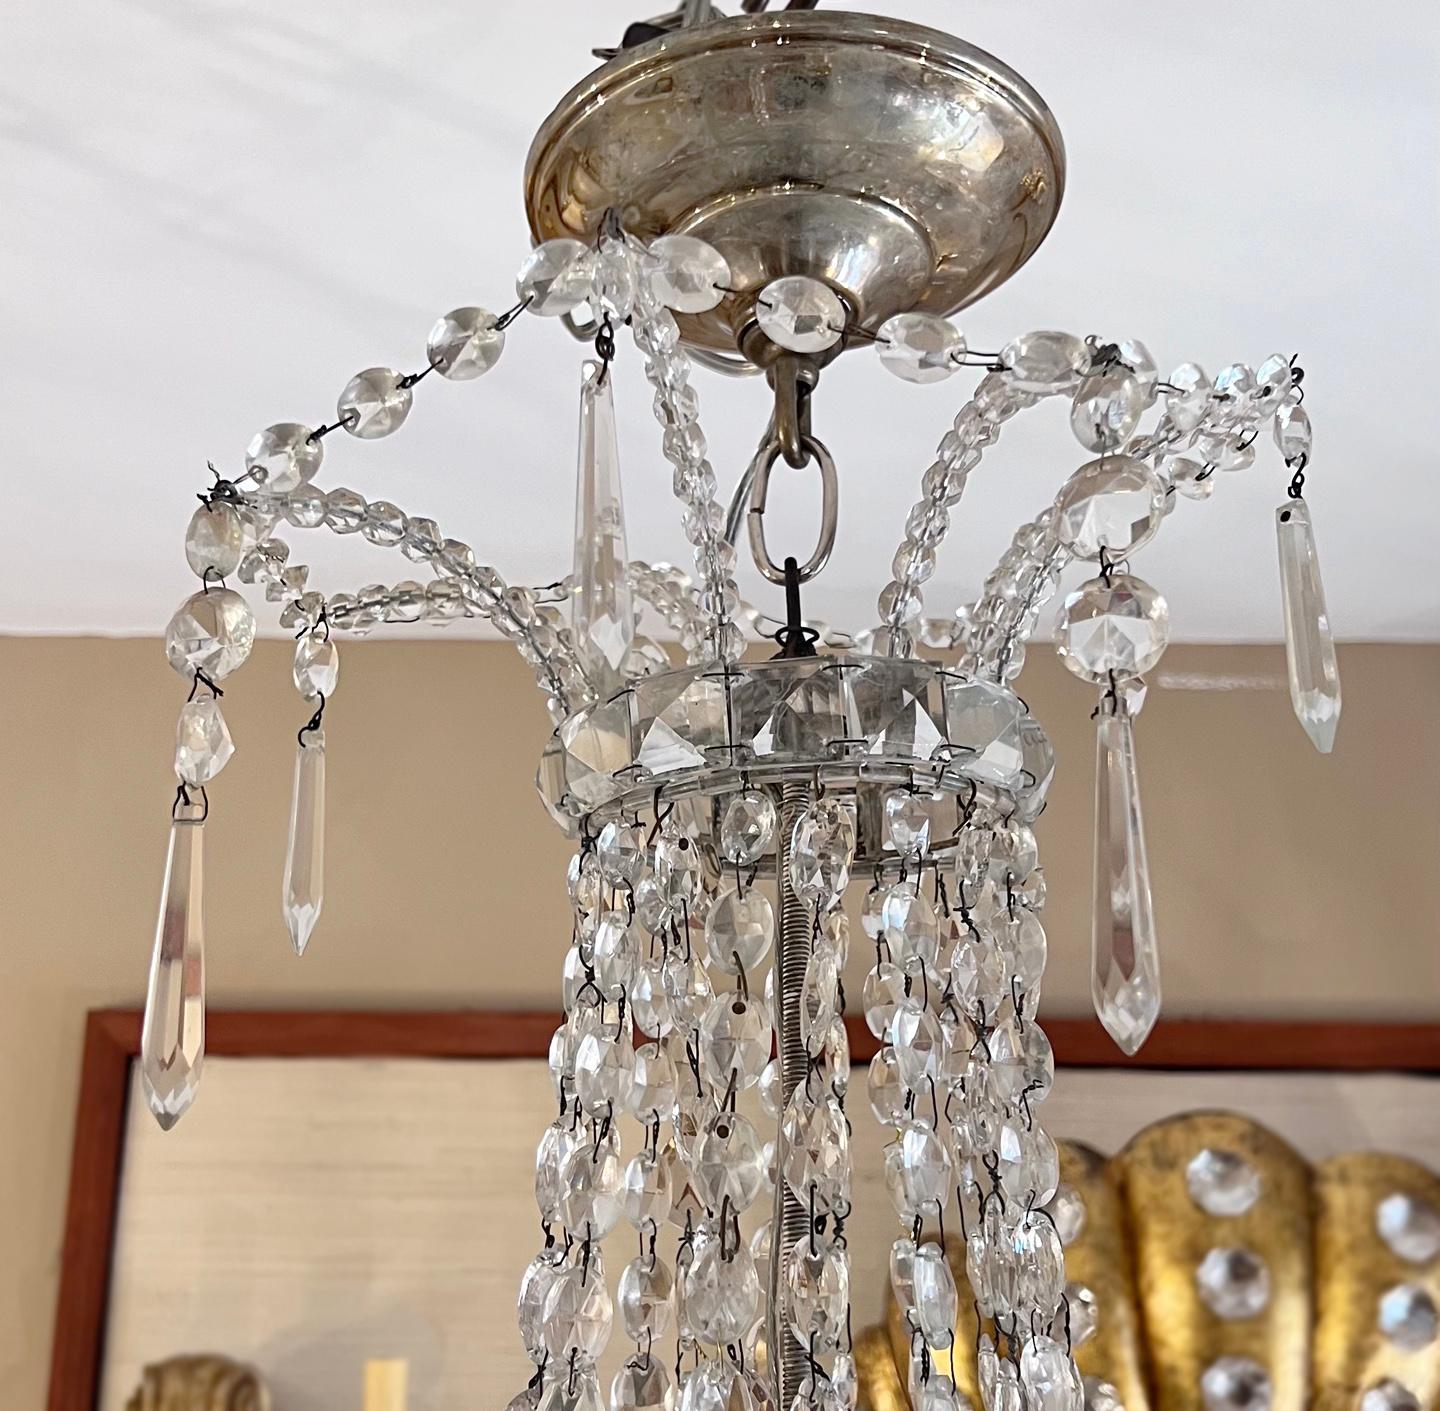 A mid 19th Century Swedish crystal neoclassic chandelier with 8 lights. Crystal pendants and beads.

Measurements:
Height: 45?
Diameter: 32?.